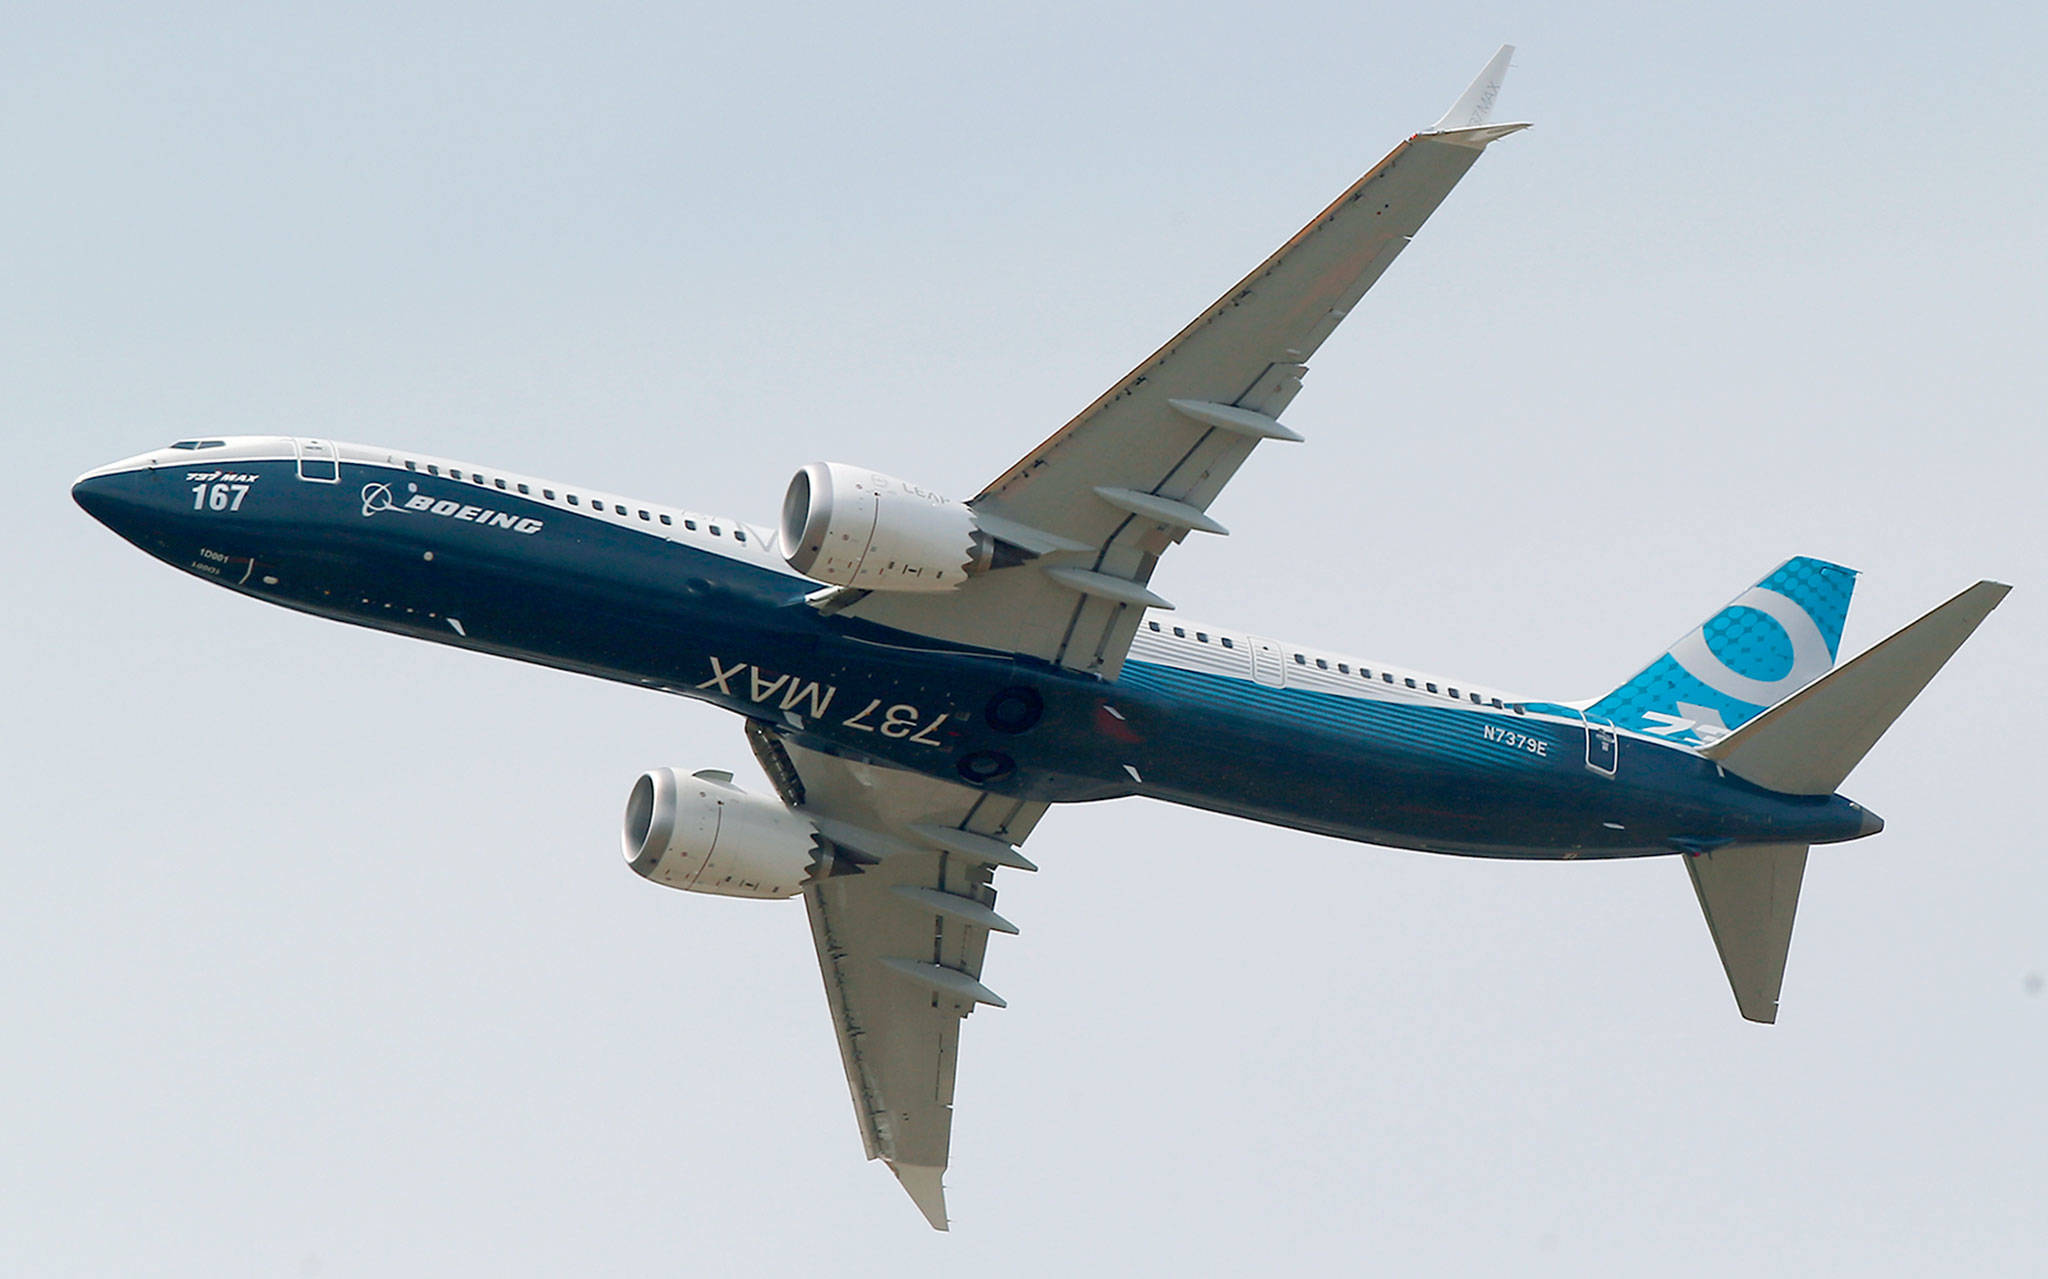 A Boing 737 Max 9 during a demonstration flight at the Paris Air Show in Le Bourget, France, in 2017. (AP Photo/Michel Euler)